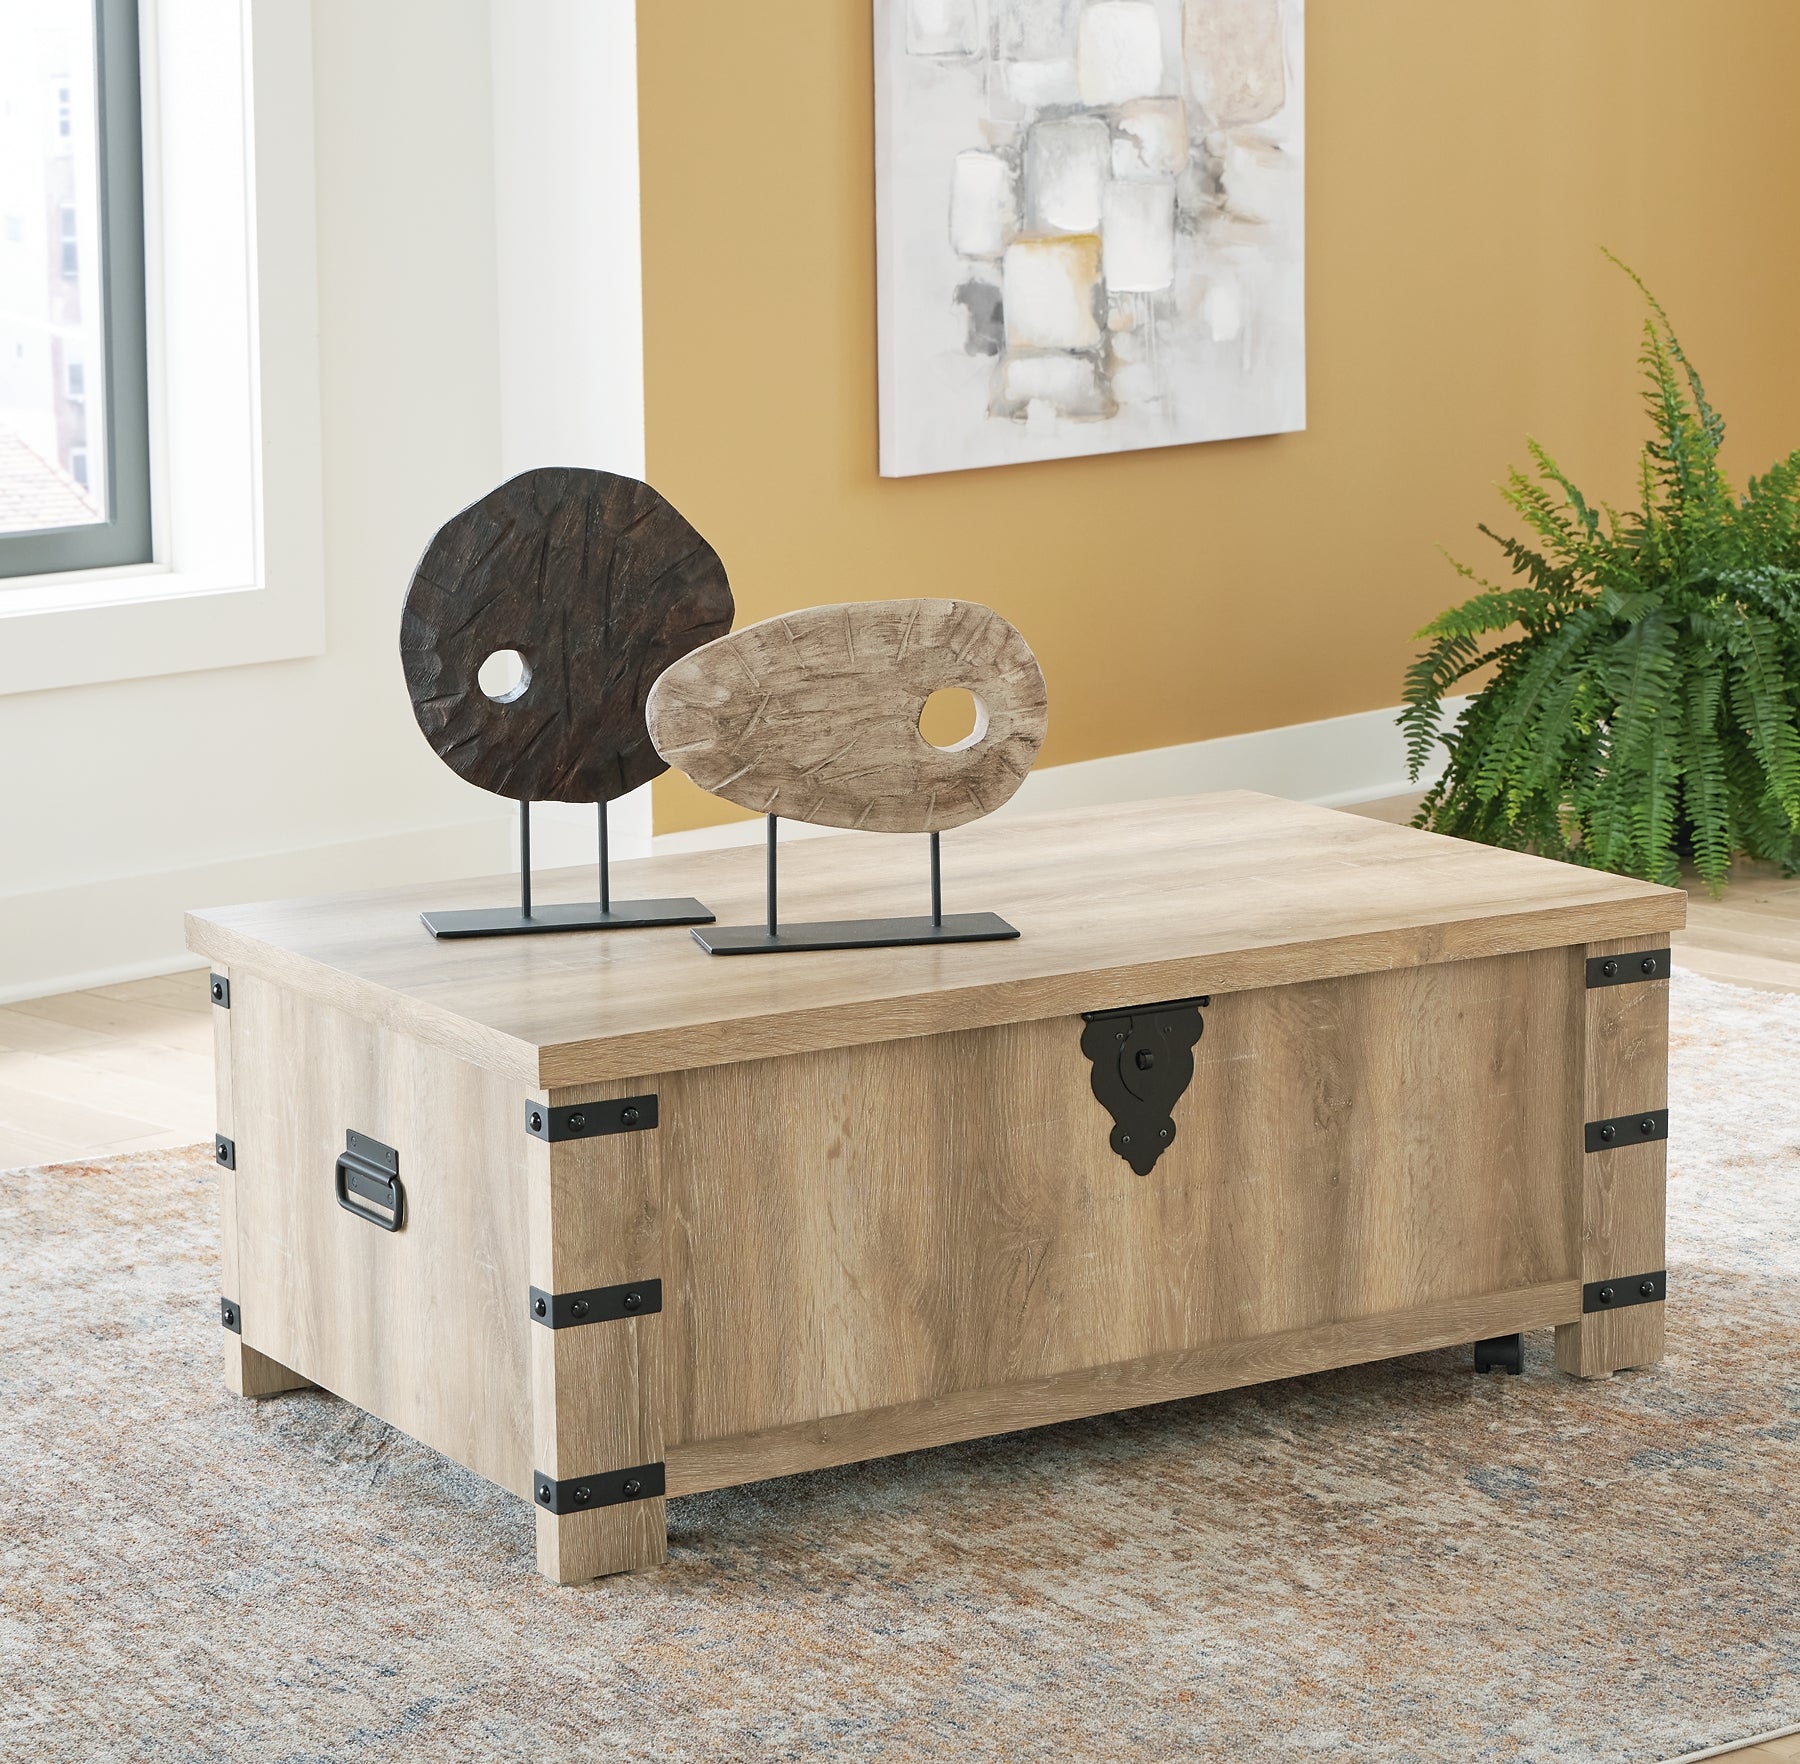 Calaboro Coffee Table with 1 End Table Wilson Furniture (OH)  in Bridgeport, Ohio. Serving Bridgeport, Yorkville, Bellaire, & Avondale